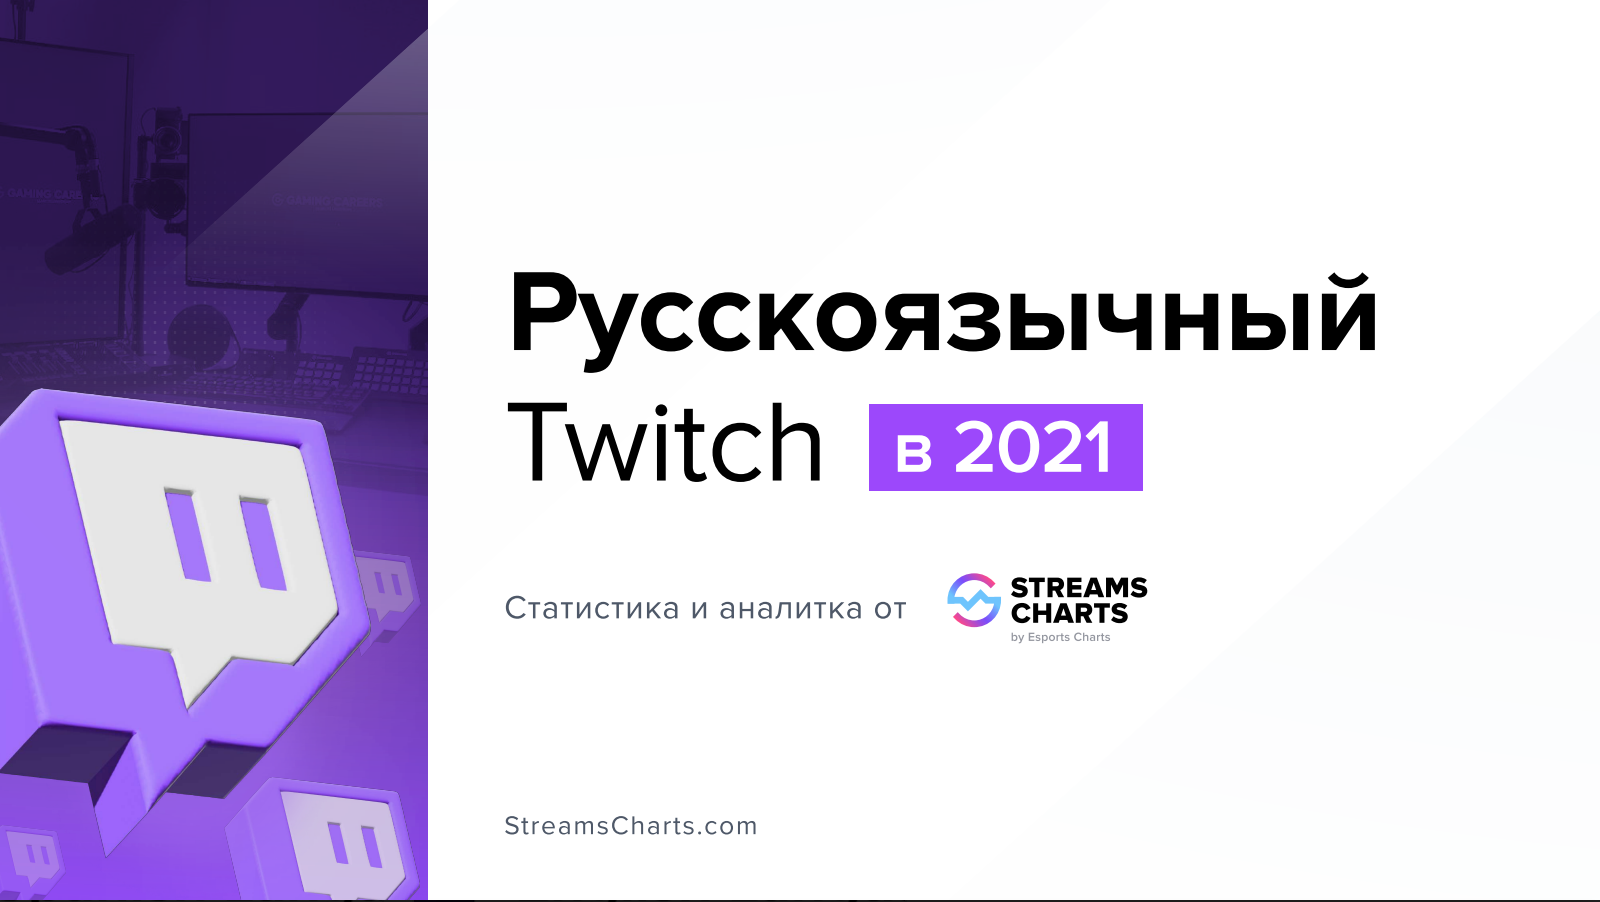 Twitch 2021 Streams Charts by Esports Charts (RUS)